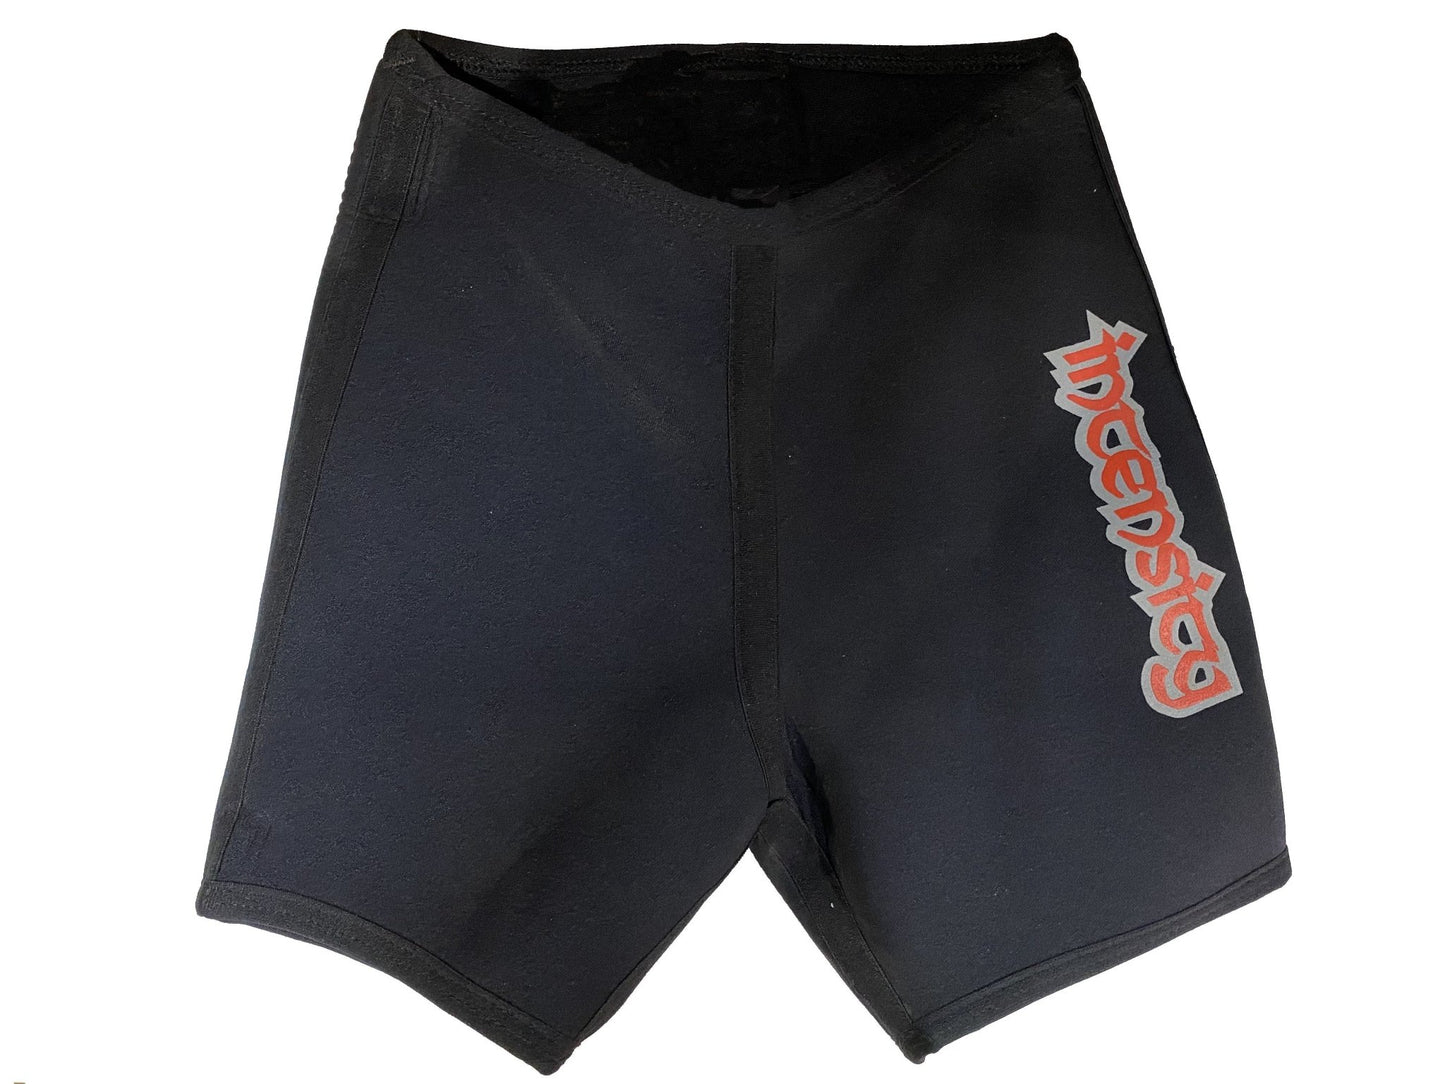 Pro Padded Barefoot Shorts Youth -IntensityIA8404-14-blk